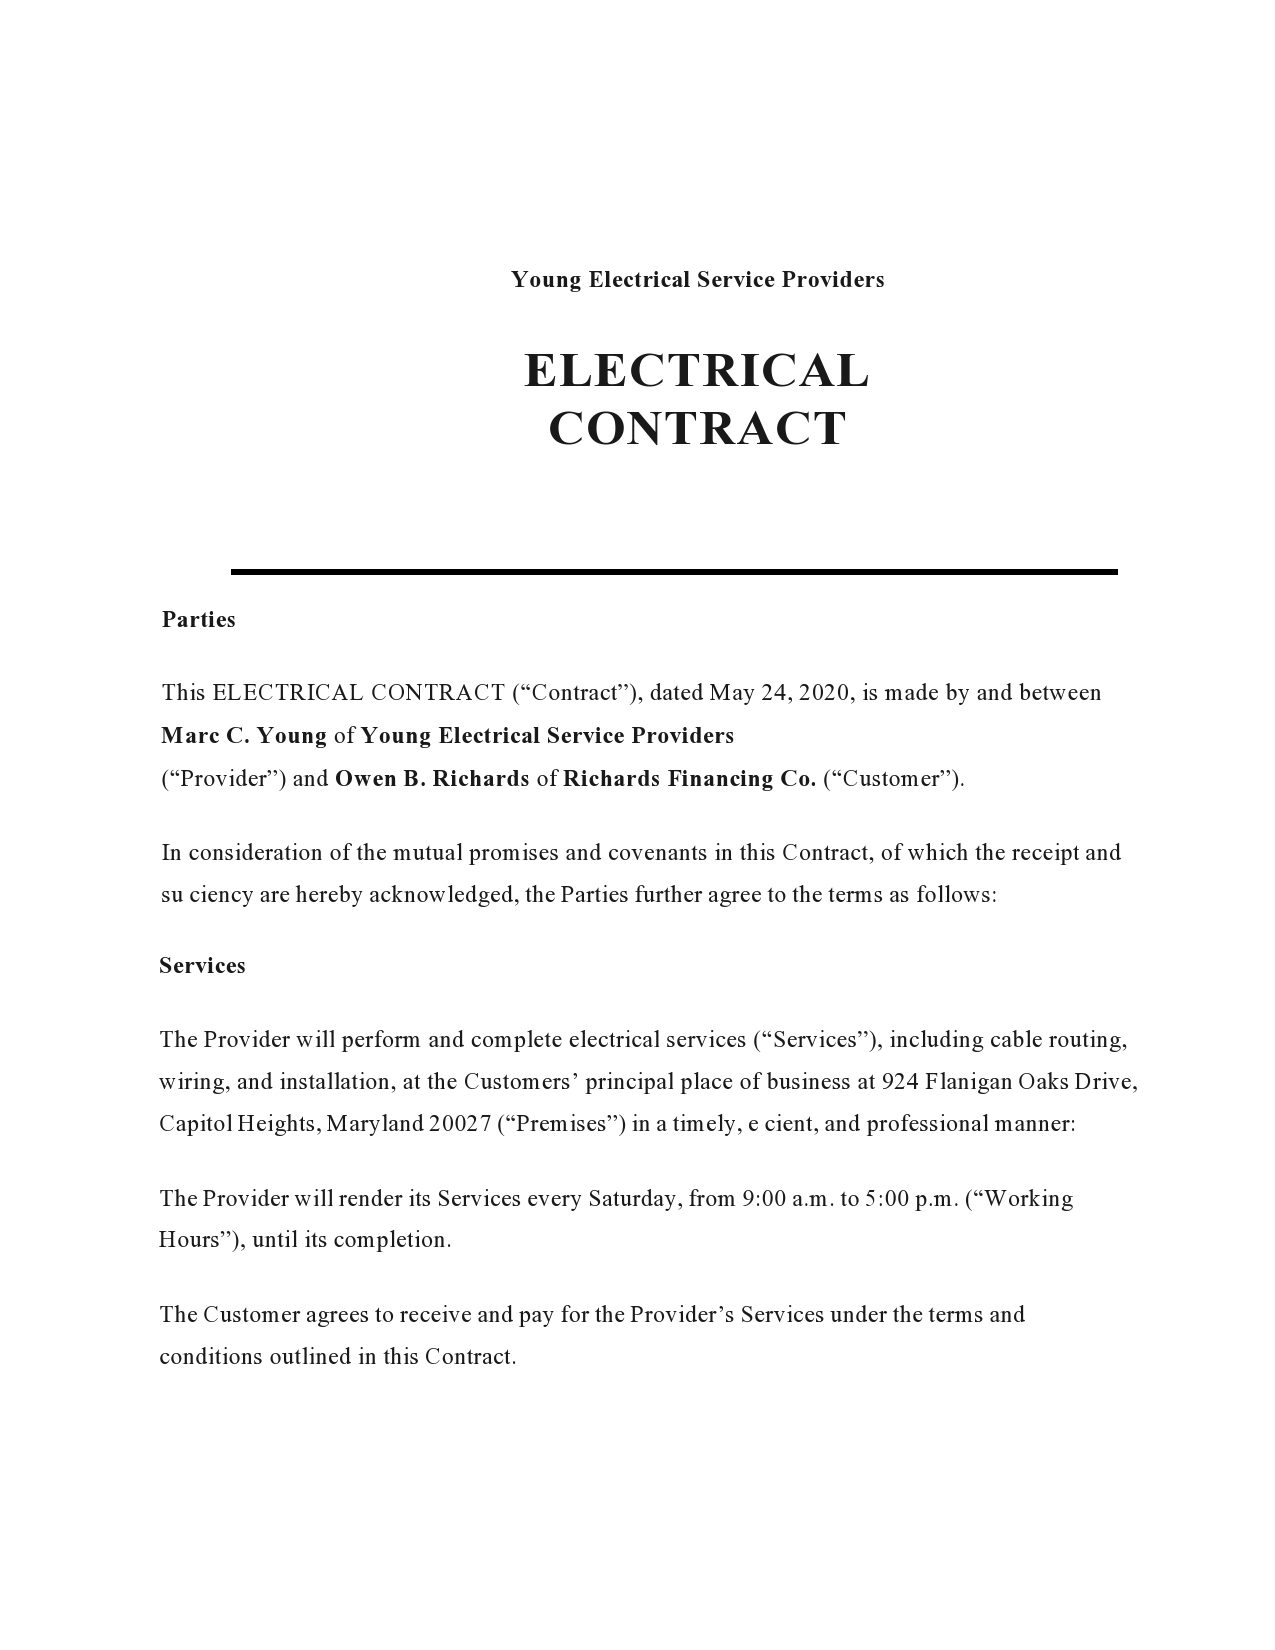 Free electrical contract 21